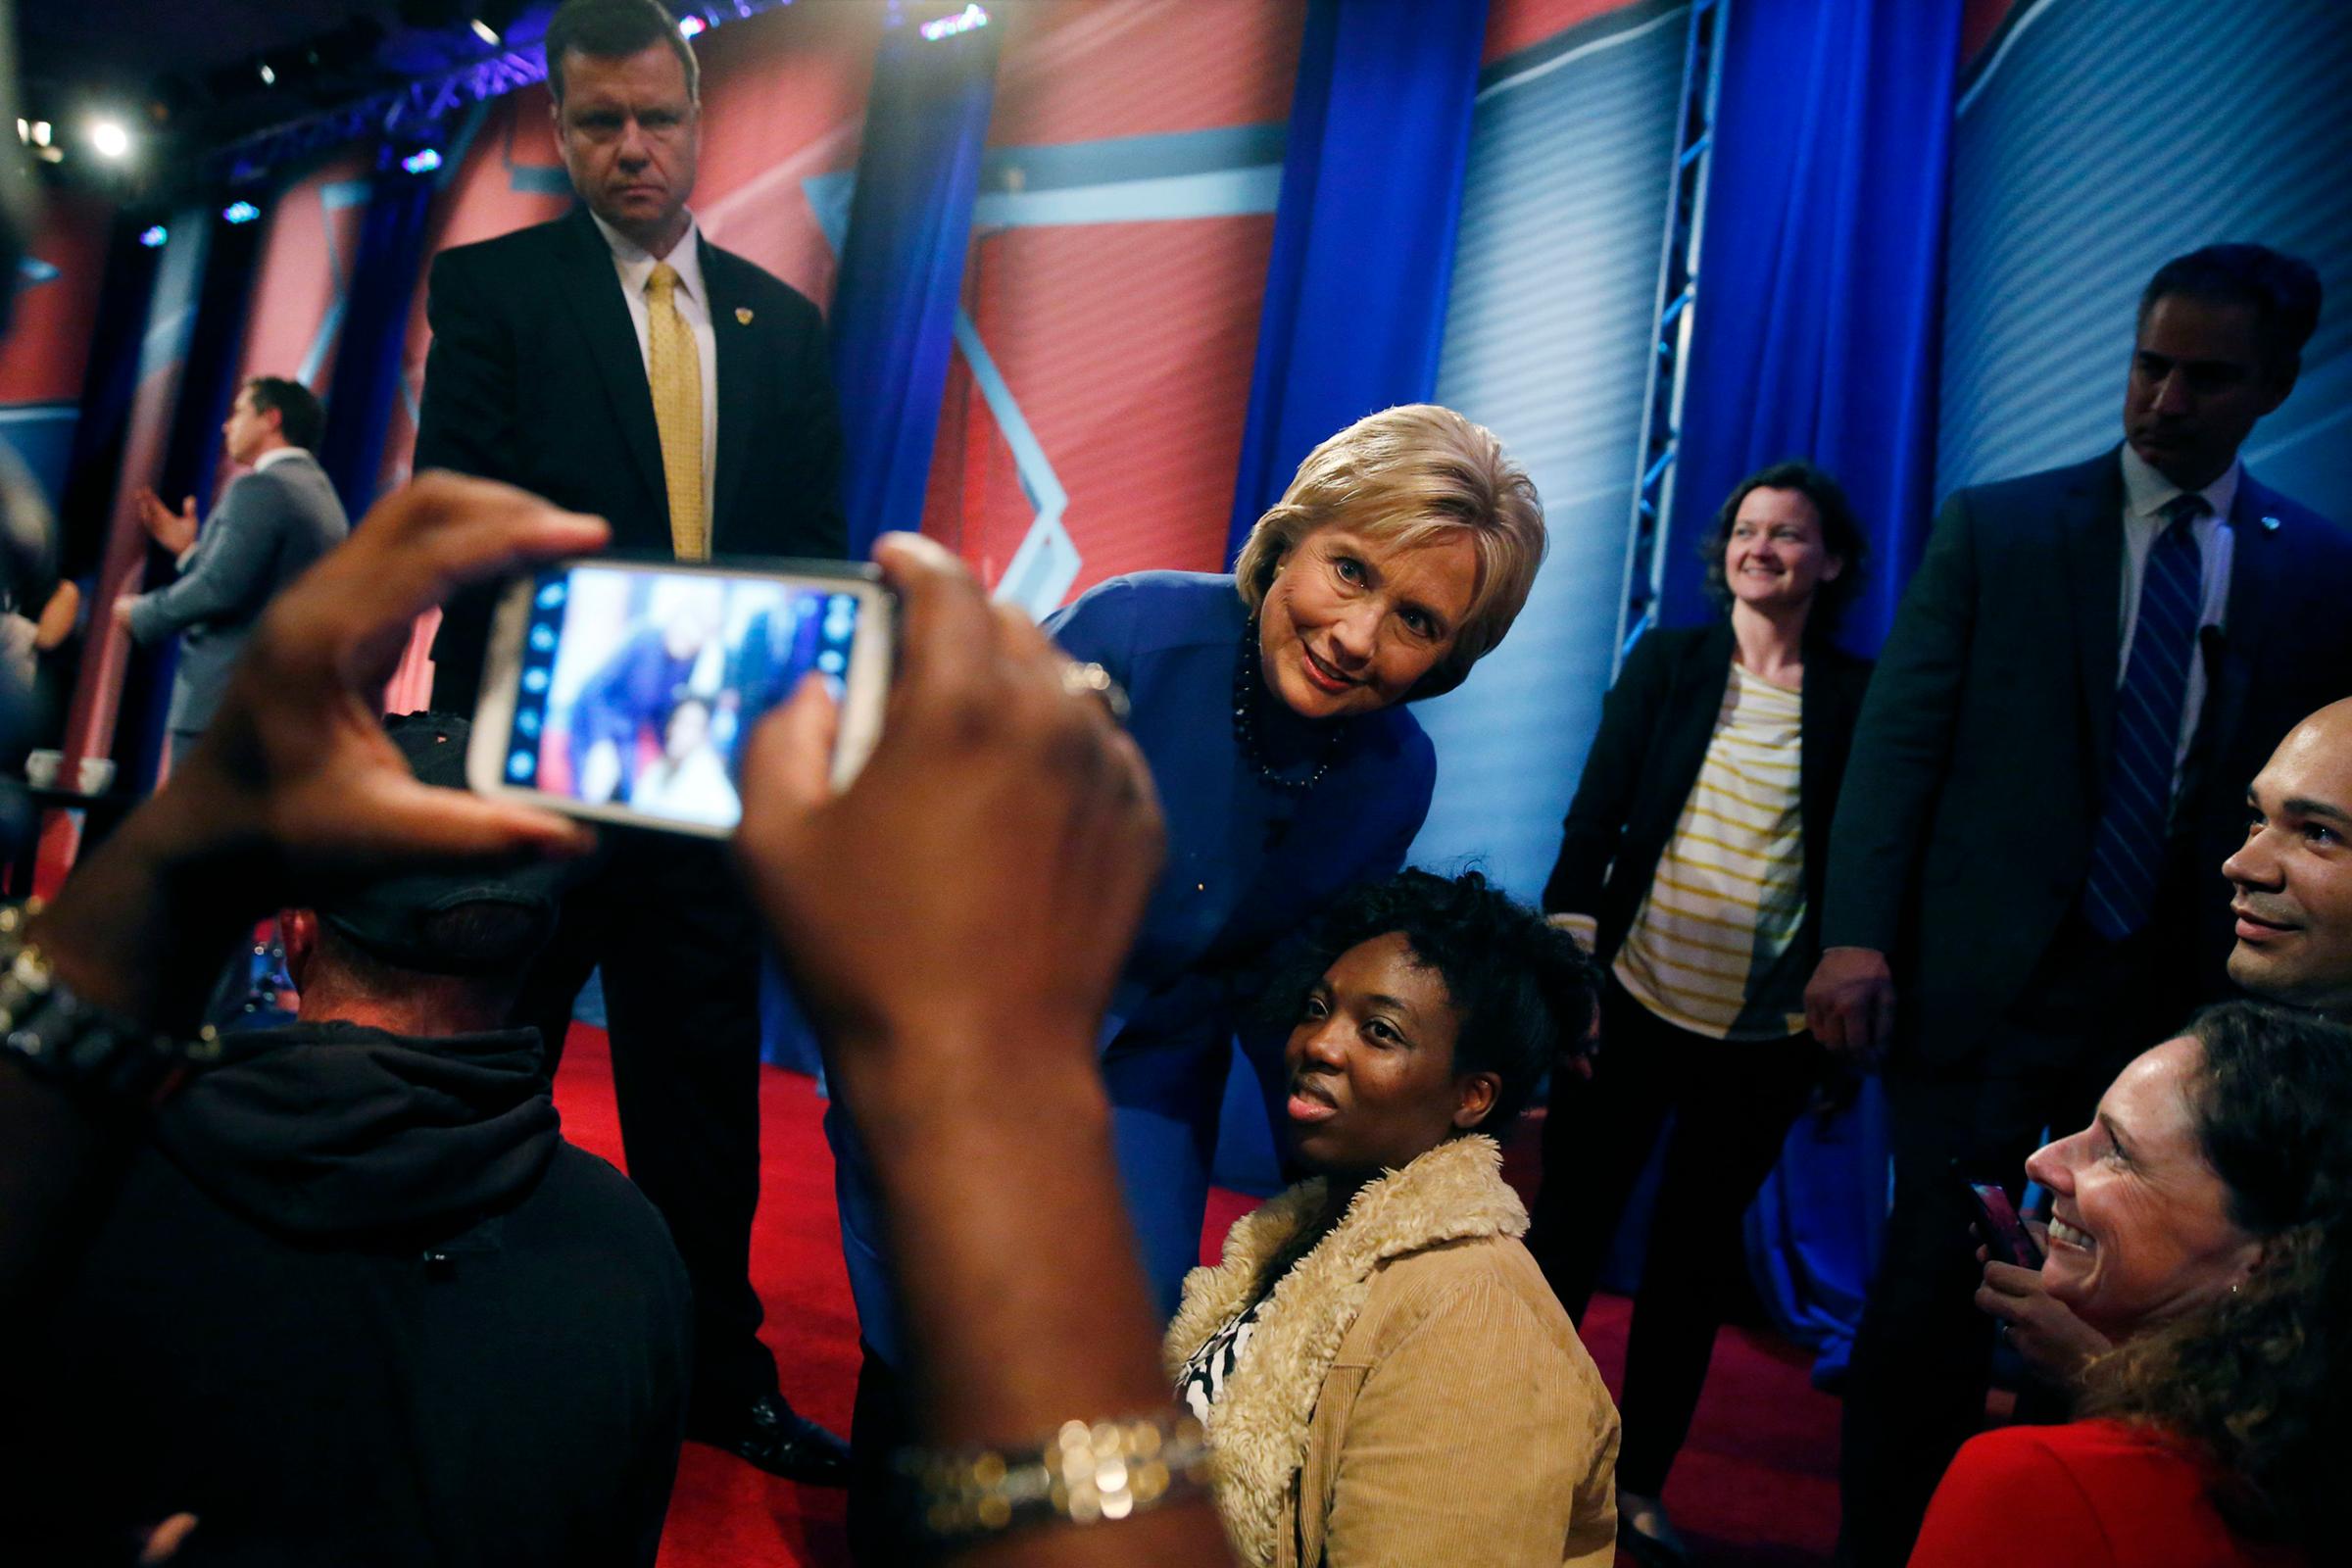 Democratic presidential candidate Hillary Clinton poses for photos with audience members after participating in a CNN town hall event at the University of South Carolina School of Law in Columbia, Feb. 23, 2016.